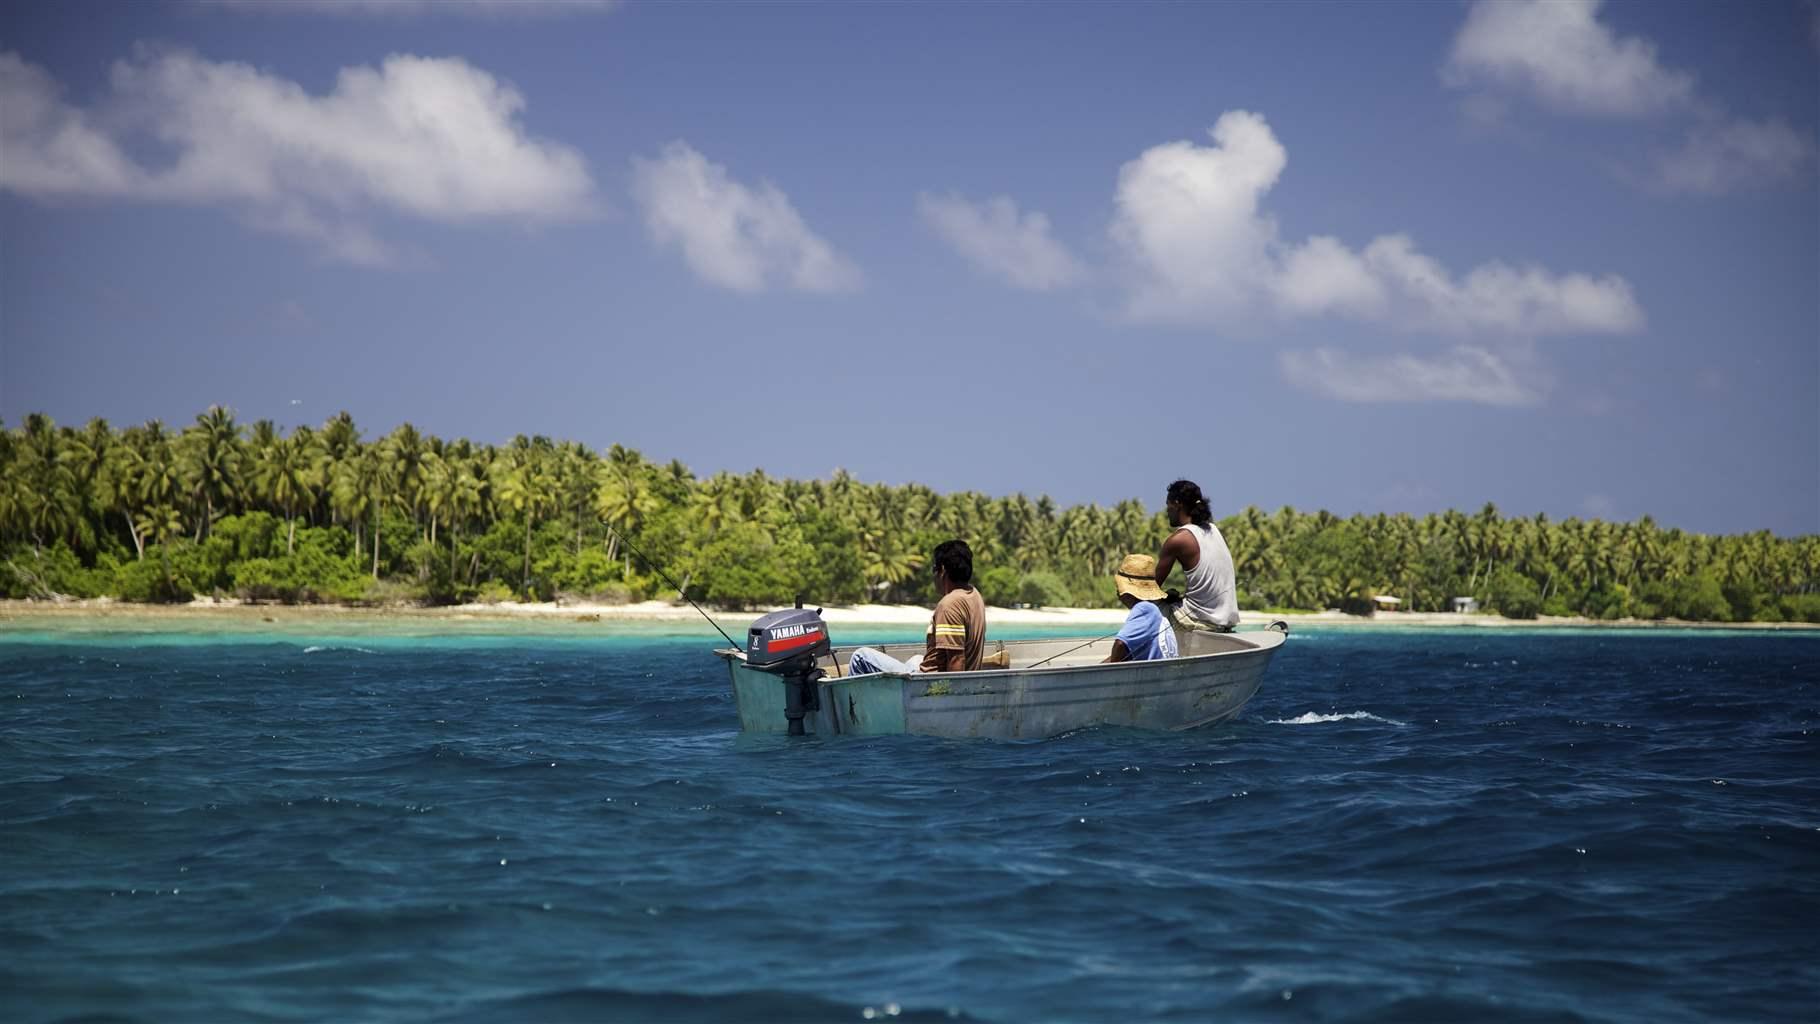 Three fishermen wait patiently for fish off the coast of Majuro in the Marshall Islands.